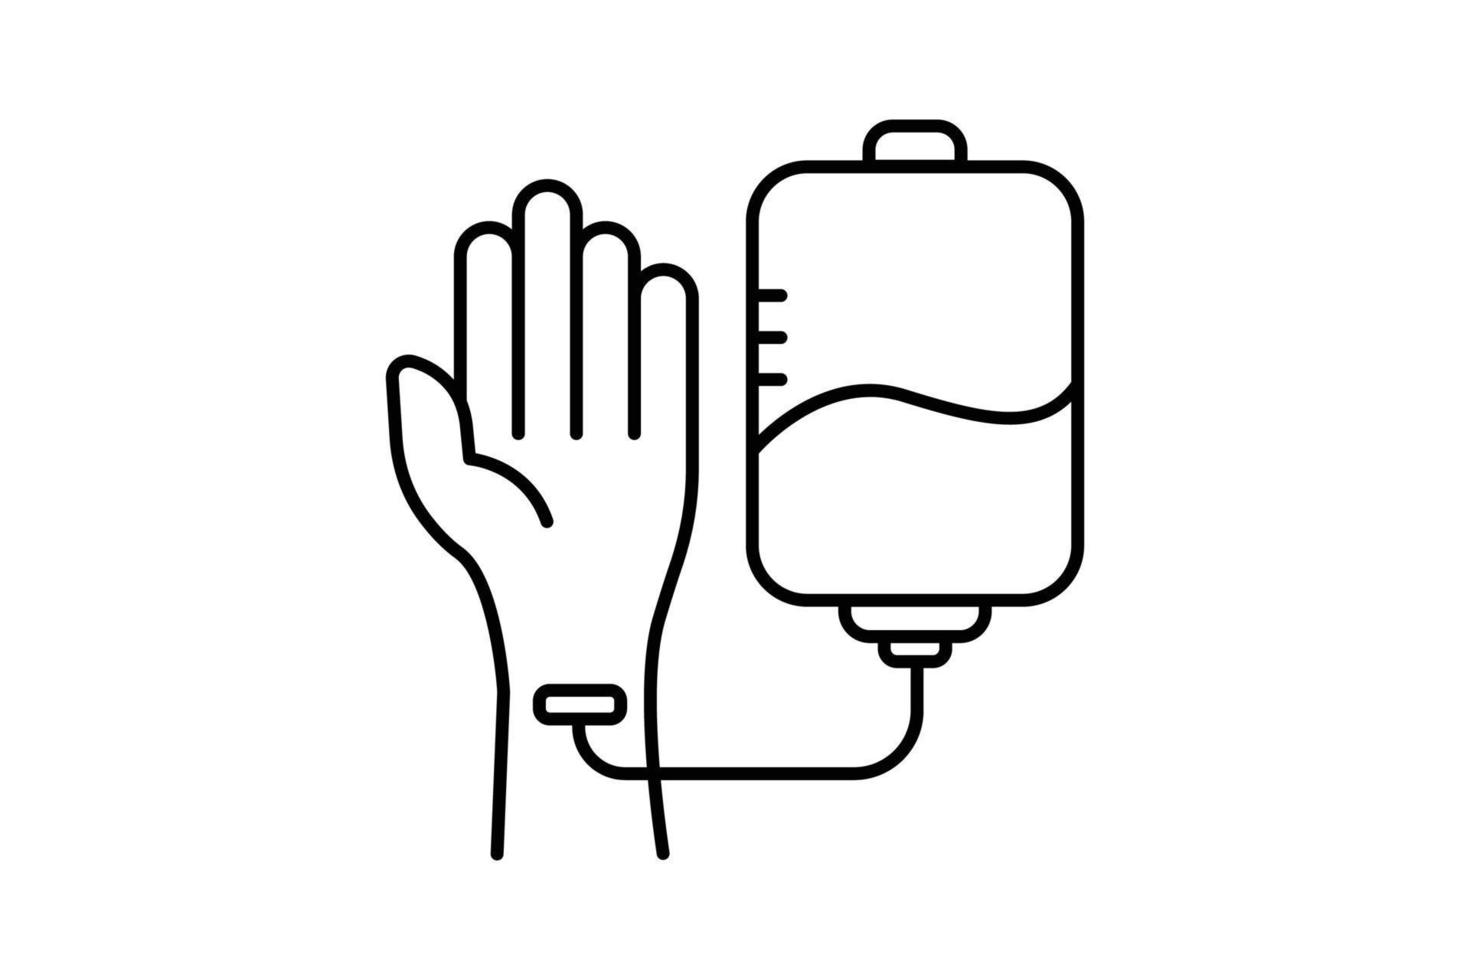 Blood transfusion icon illustration. hand with blood bag. Icon related to charity. Line icon style. Simple vector design editable